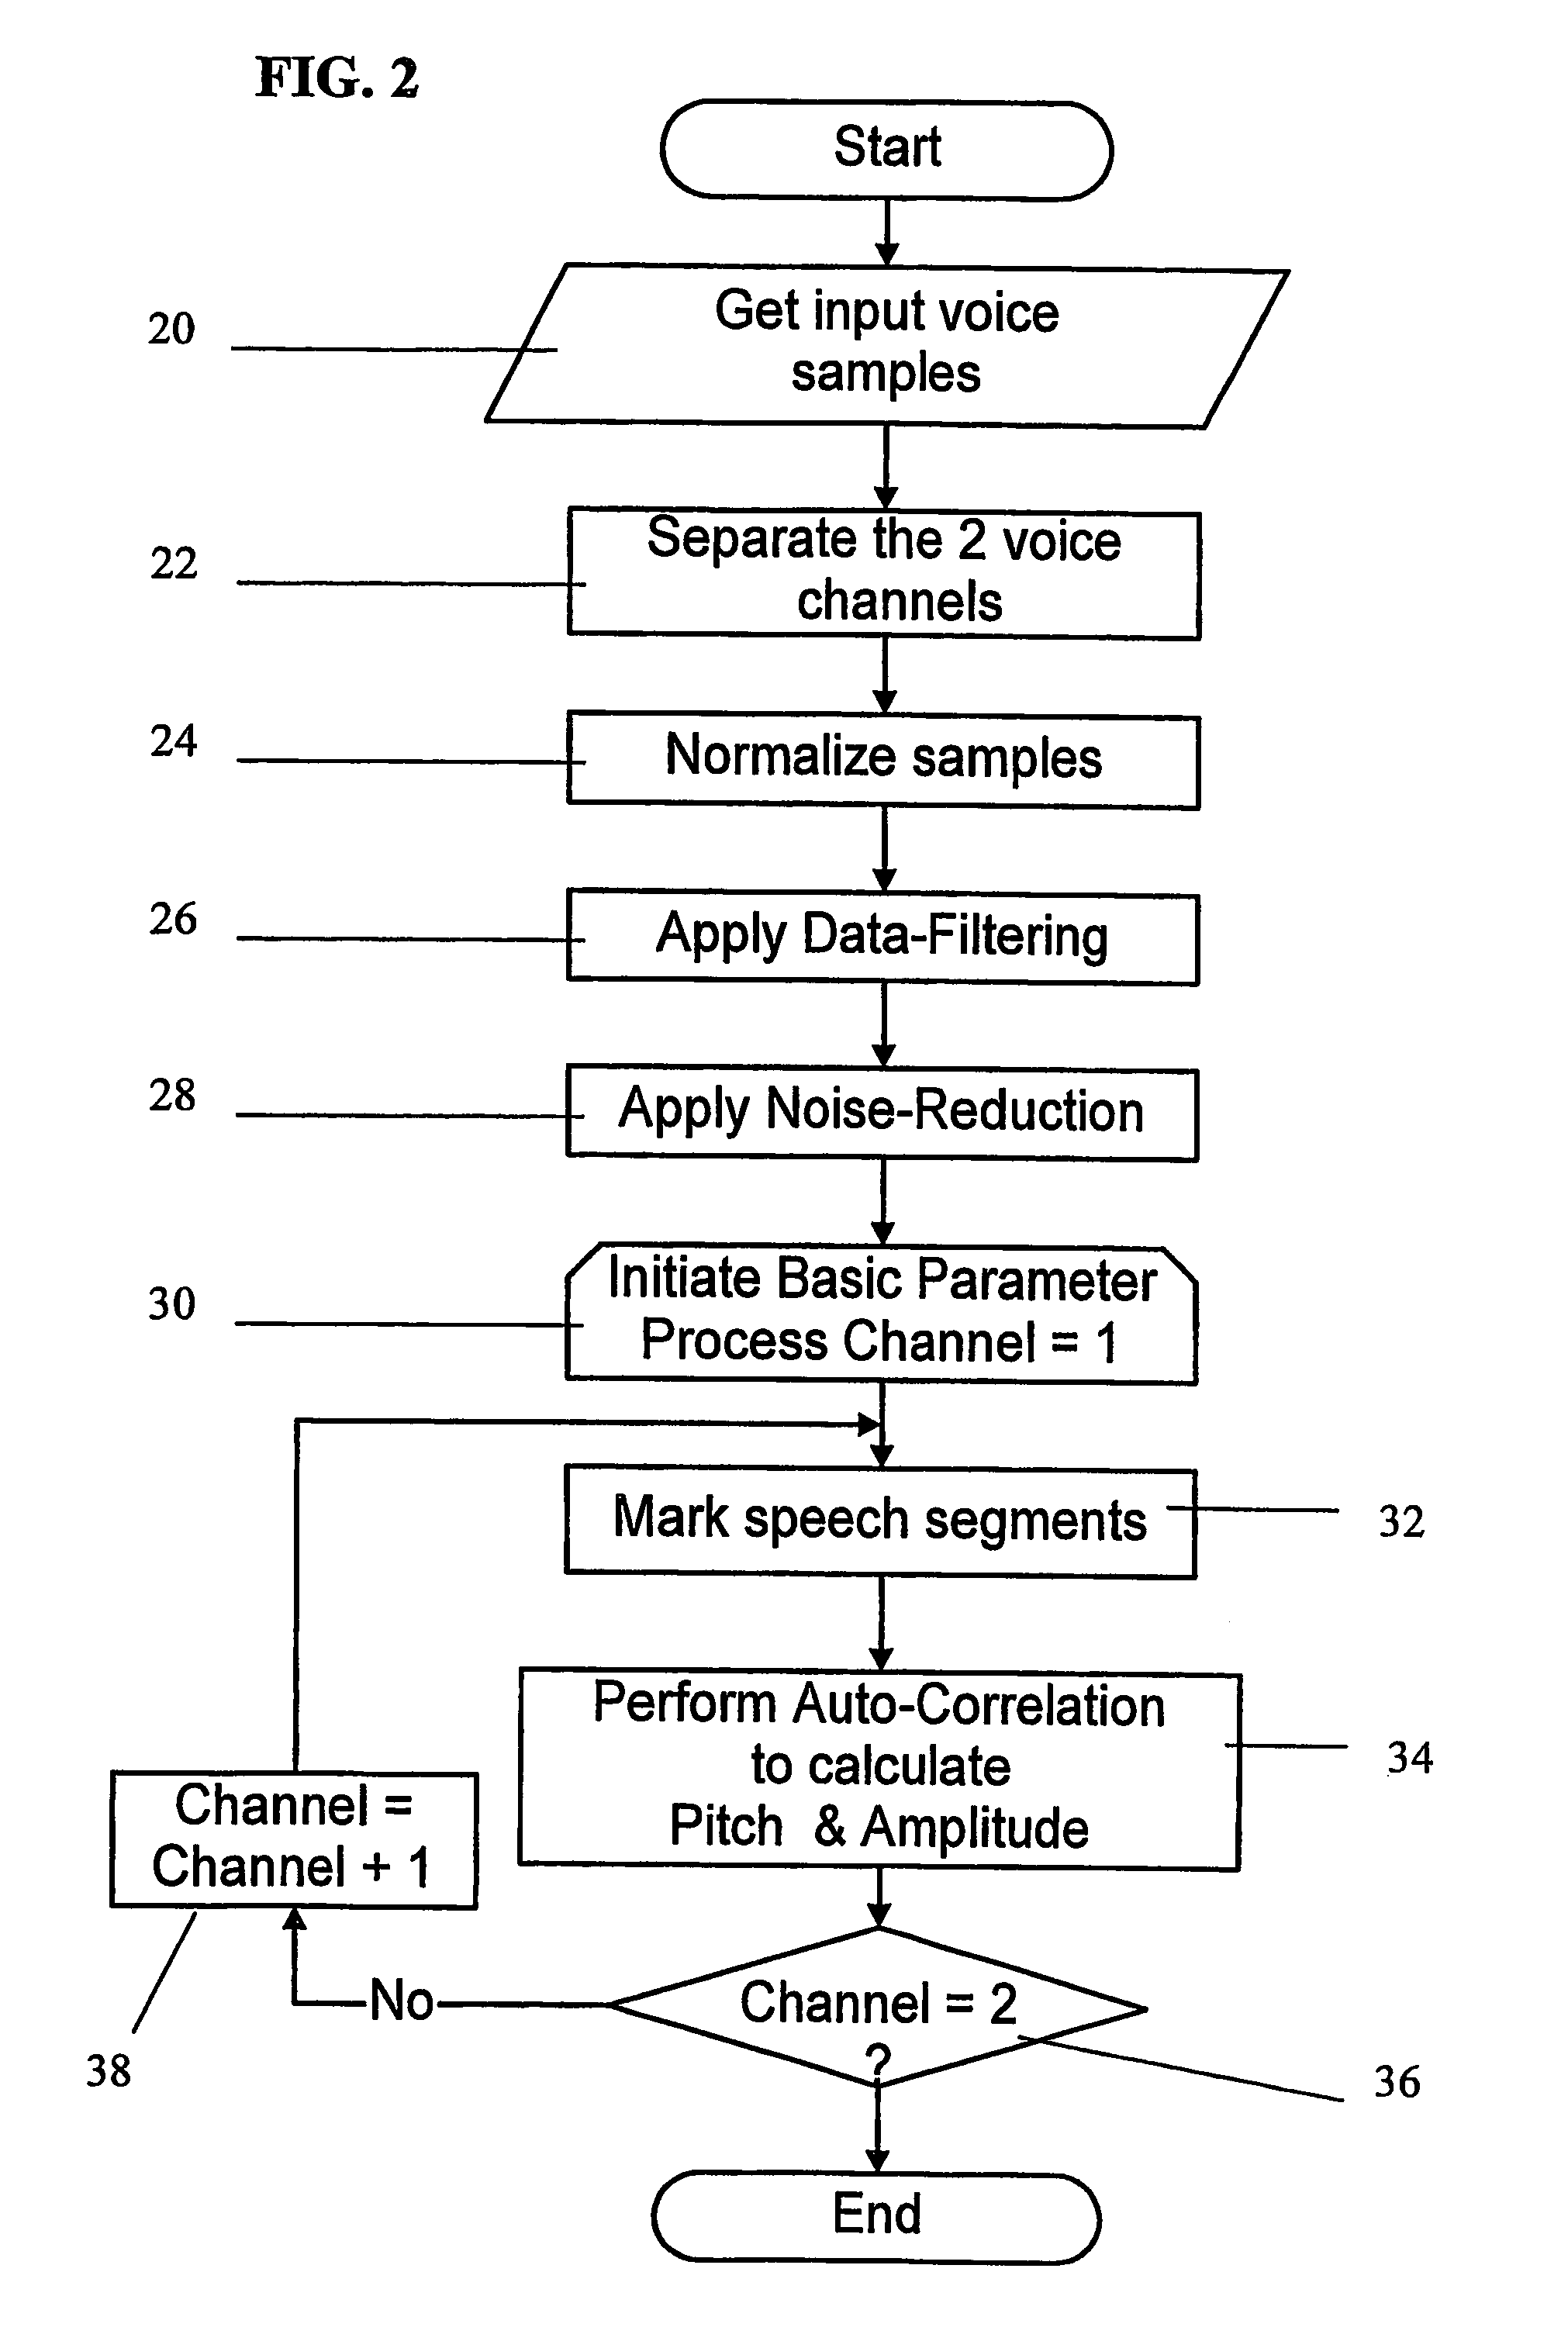 Method and apparatus for determining emotional arousal by speech analysis